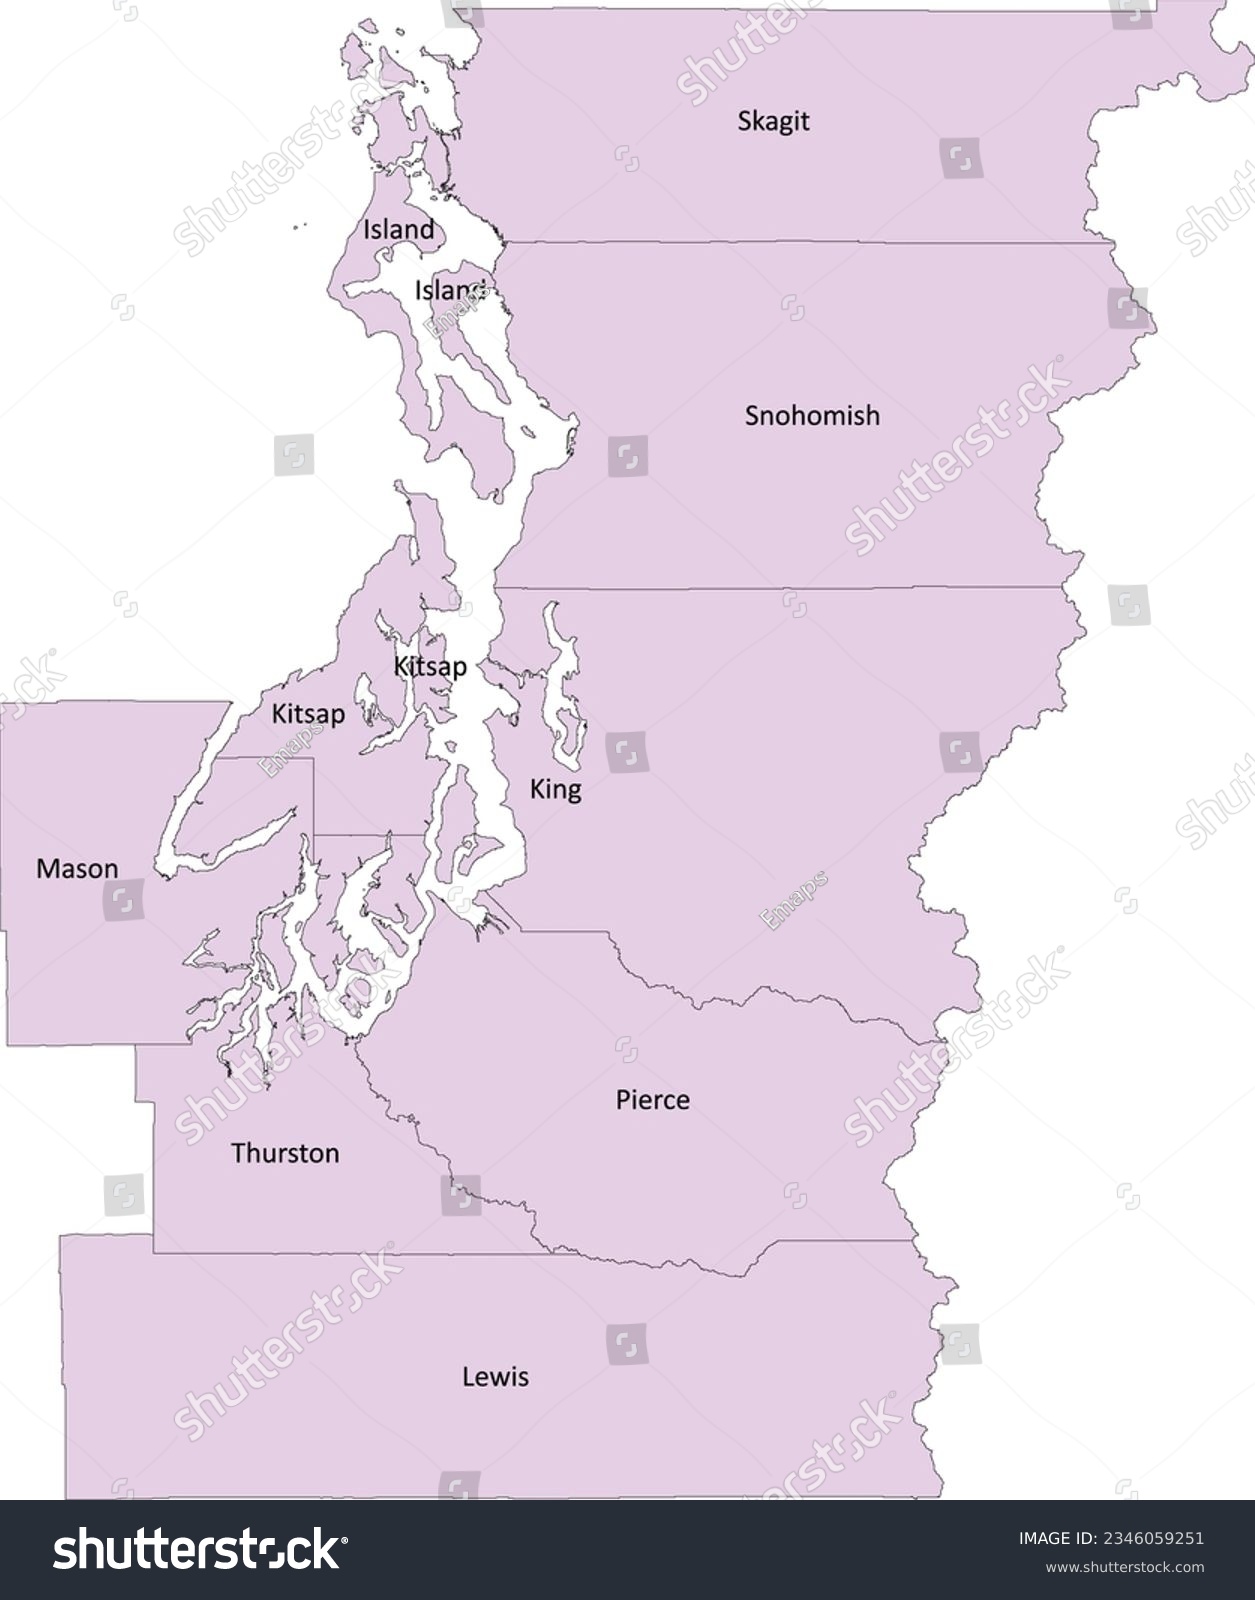 SVG of US-Seattle-Tacoma, WA Combined Statistical Area (CSA) with Washington counties svg